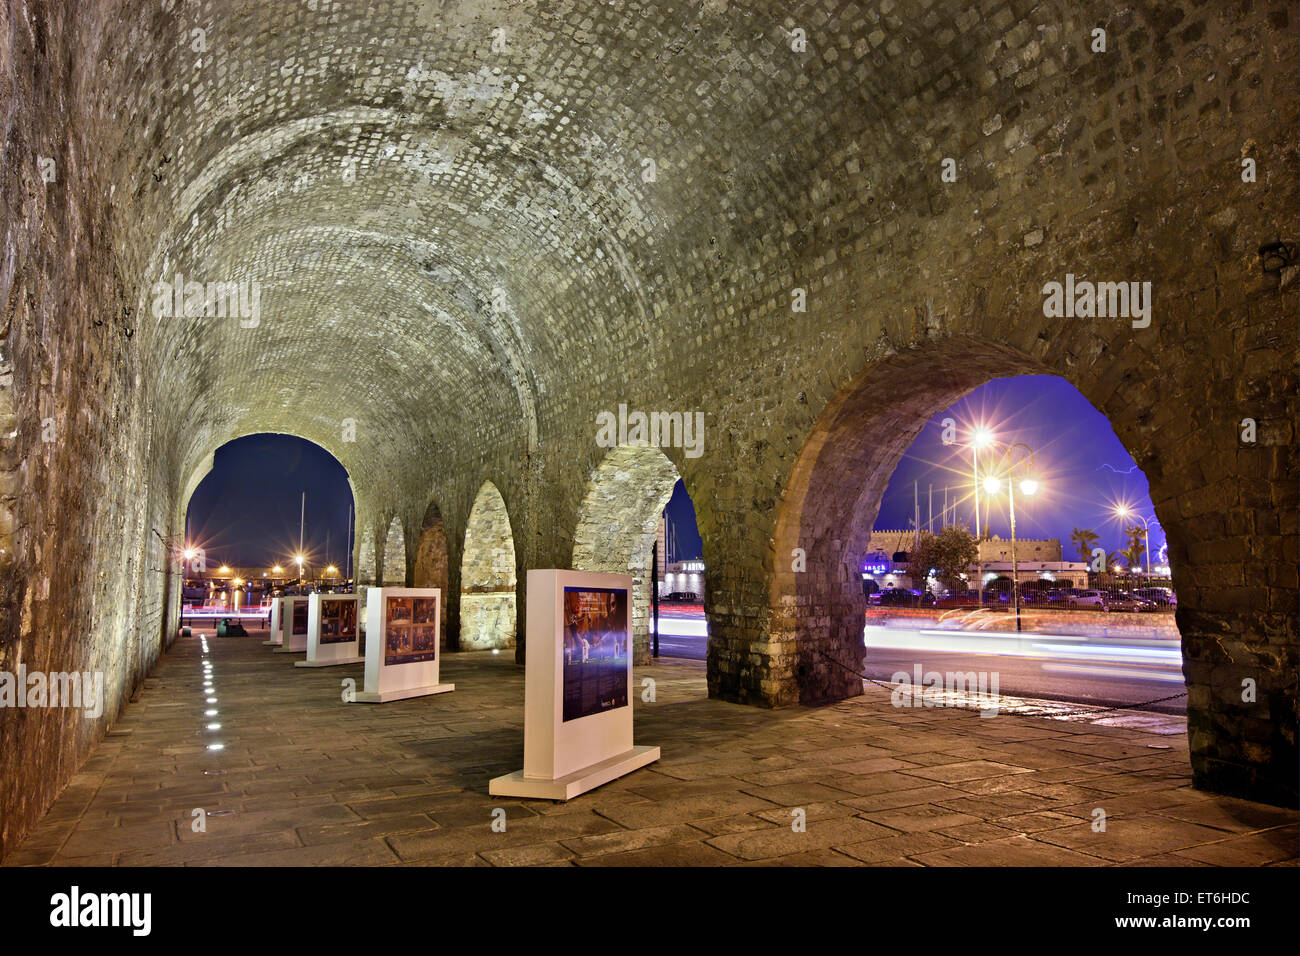 Part of the Venetian shipyards ('Neoria'), close to the old port of Heraklion, in the 'blue' hour. Crete island, Greece Stock Photo